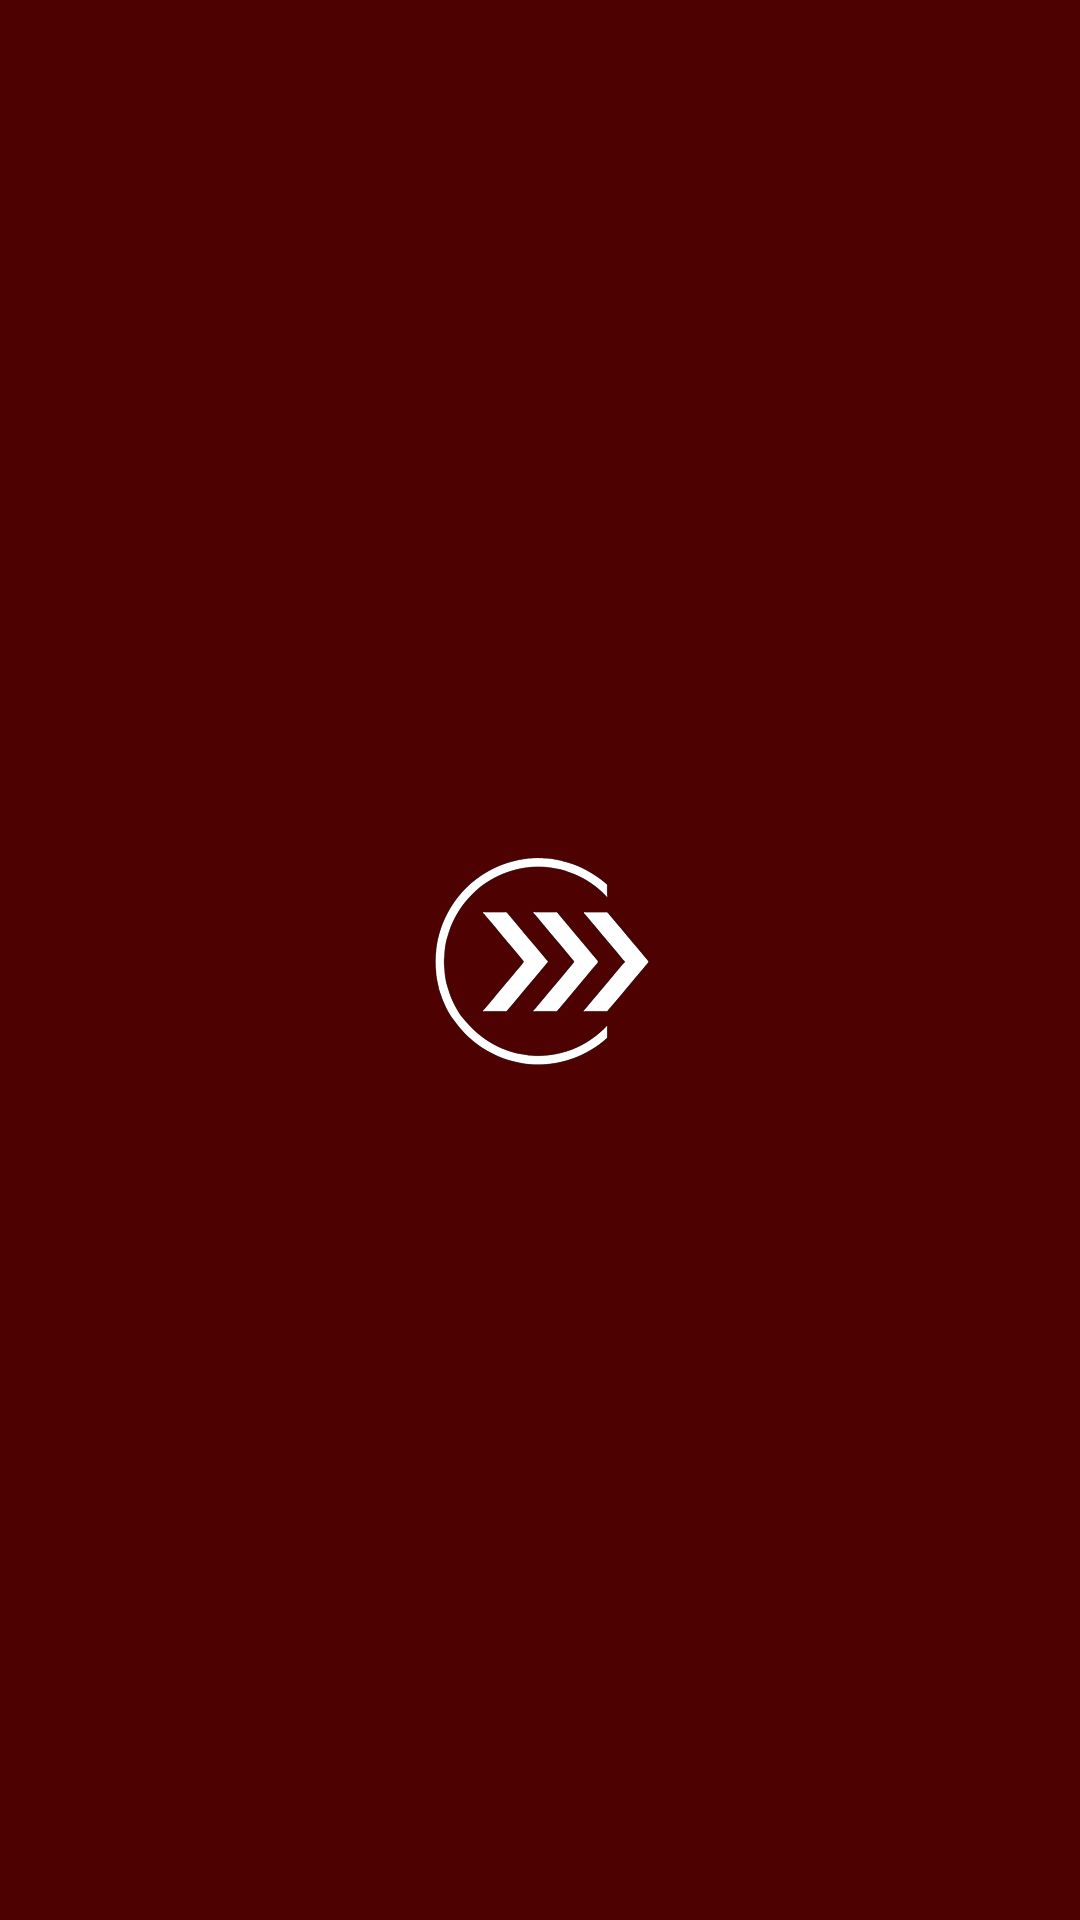 Dci Cadets HD Wallpaper For iPhone Simple Clean Elegant Design